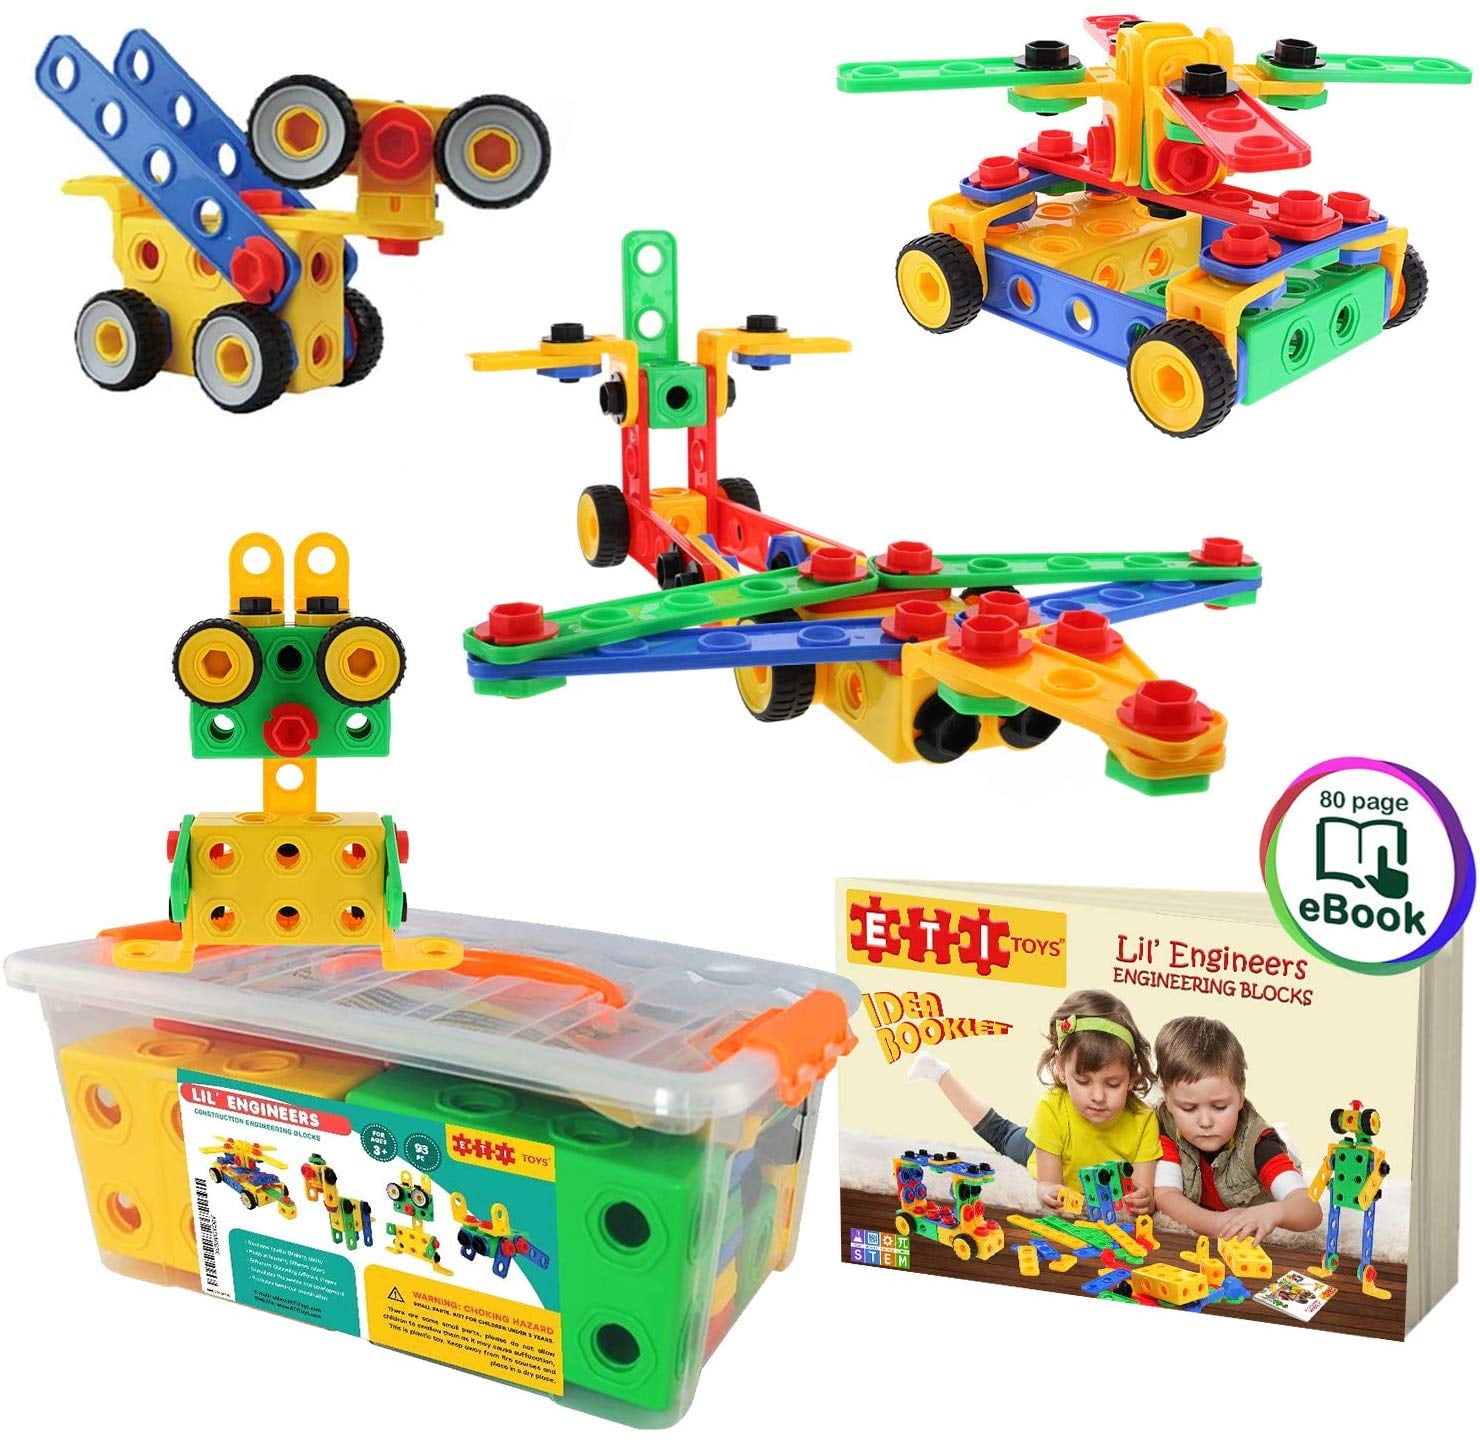 top ten toys for 4 year old boy